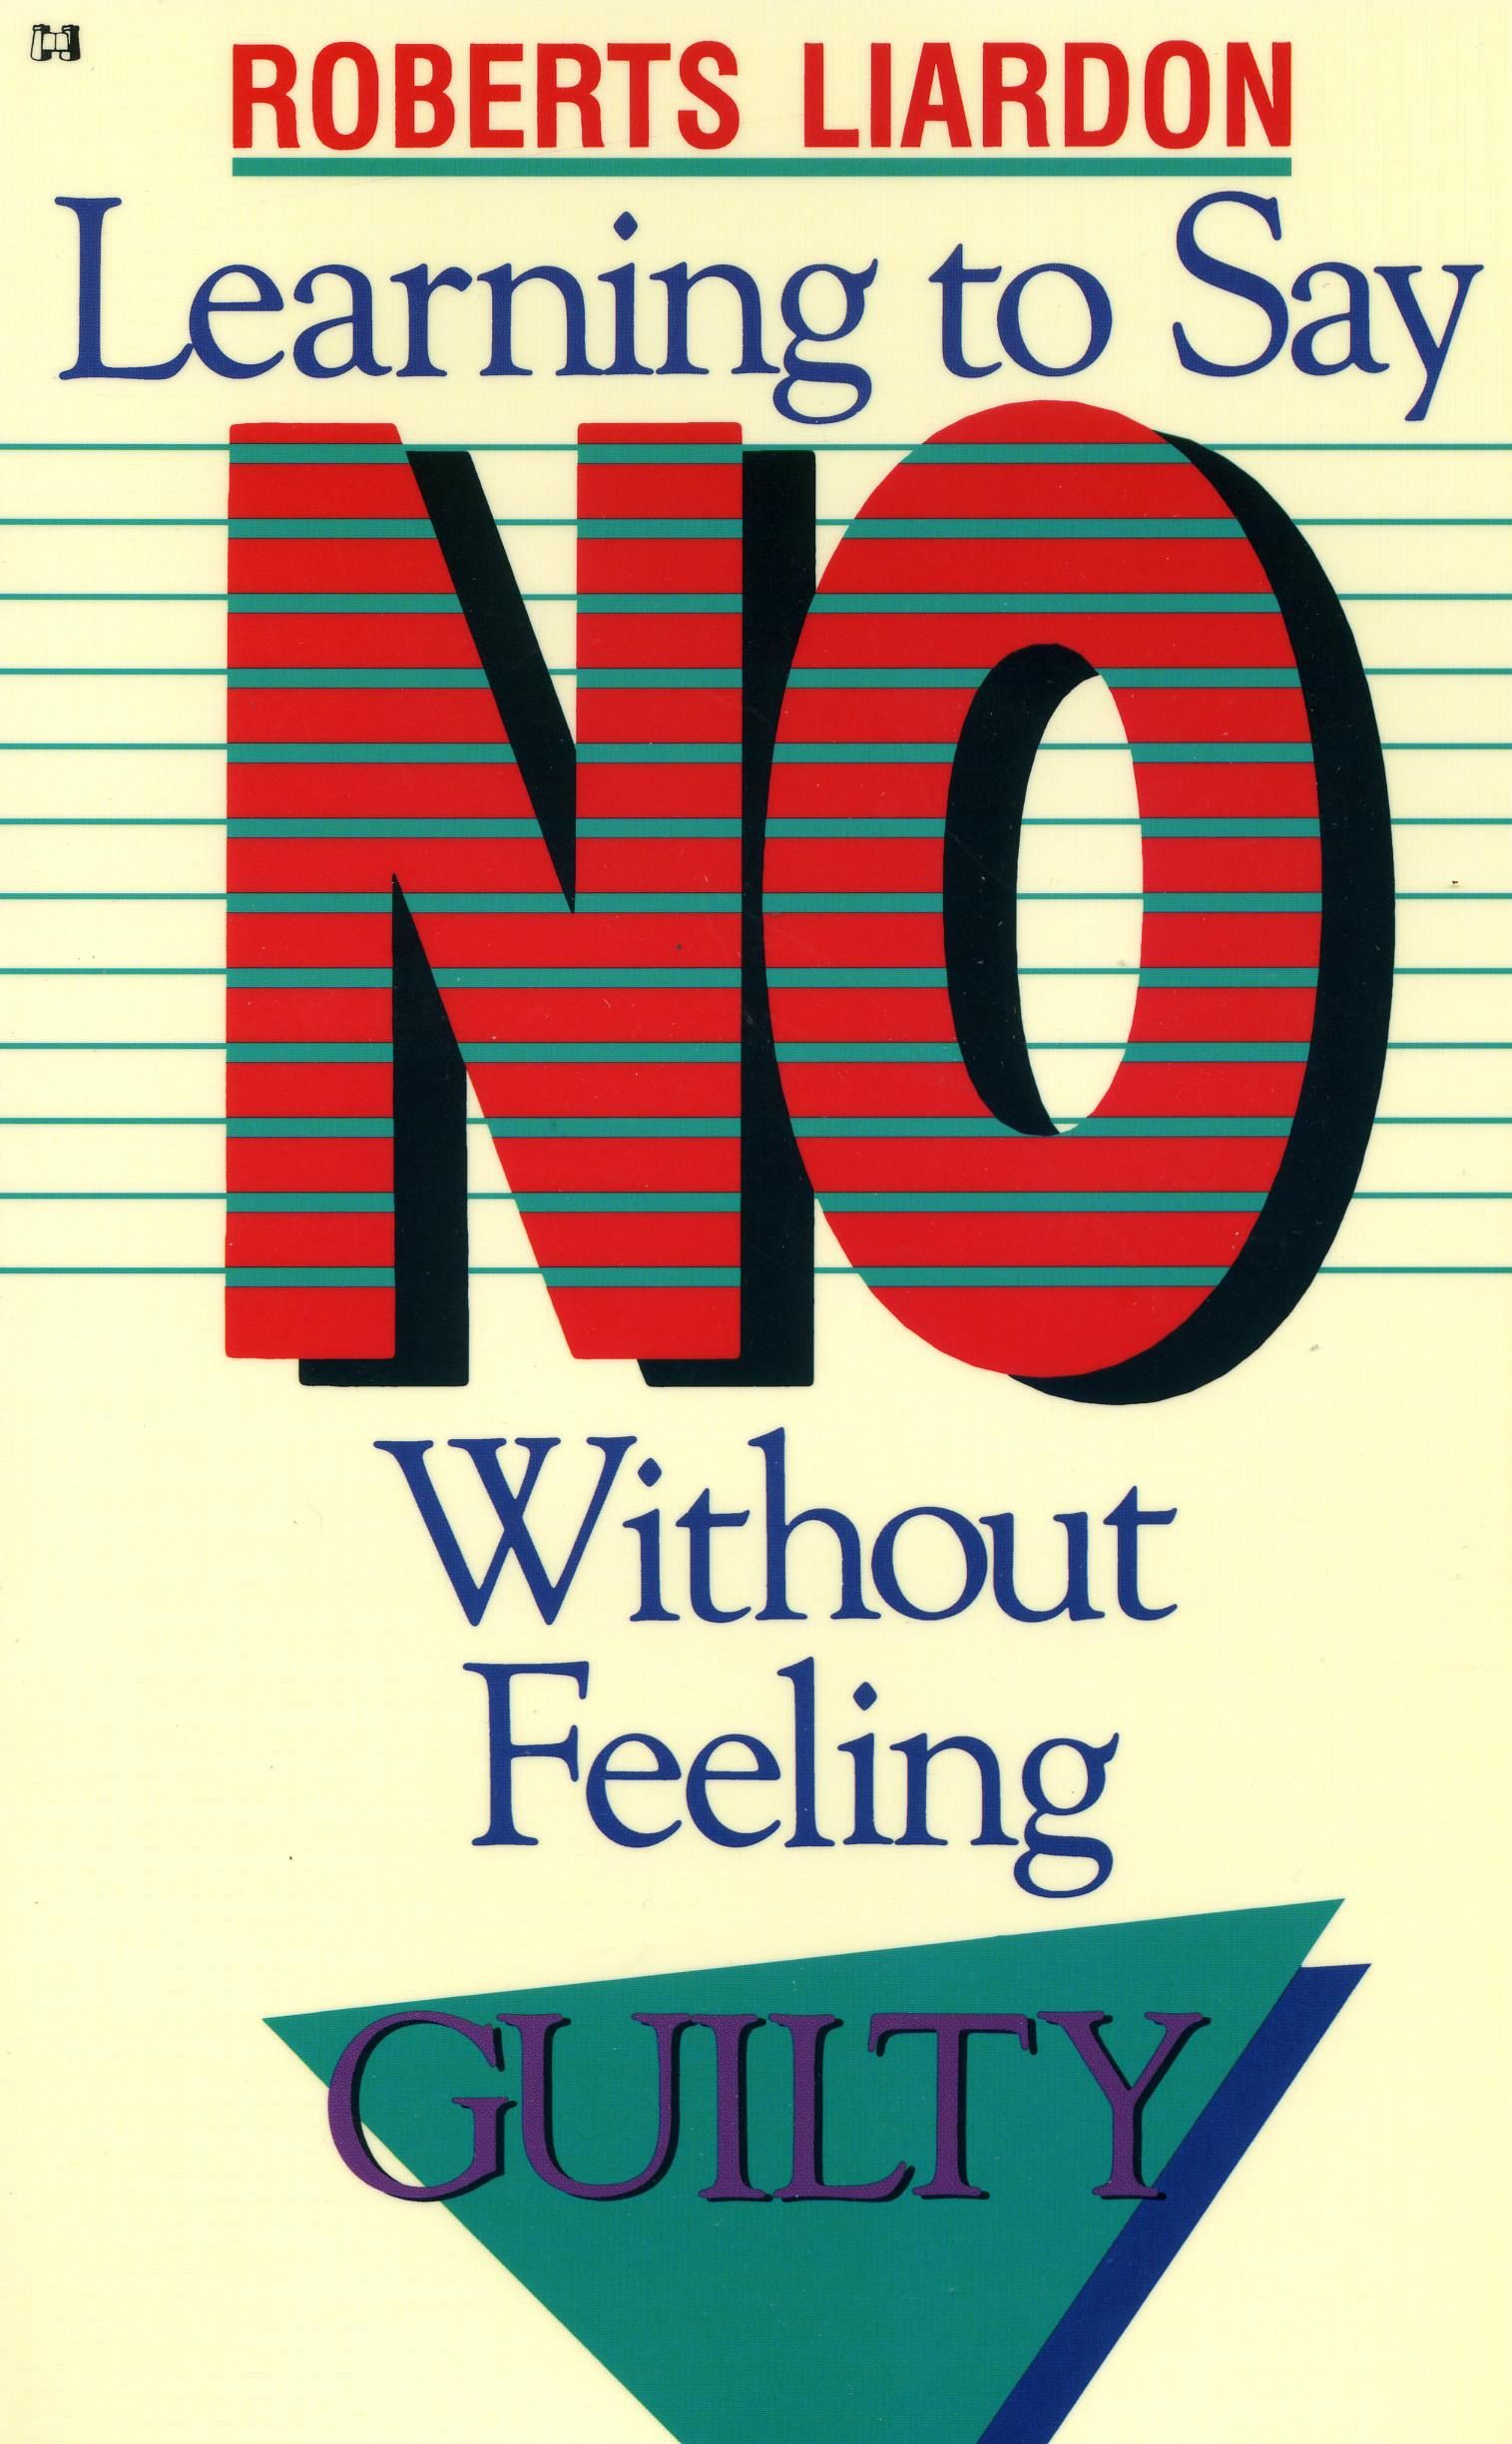 R.Liardon: Learning to say "No"